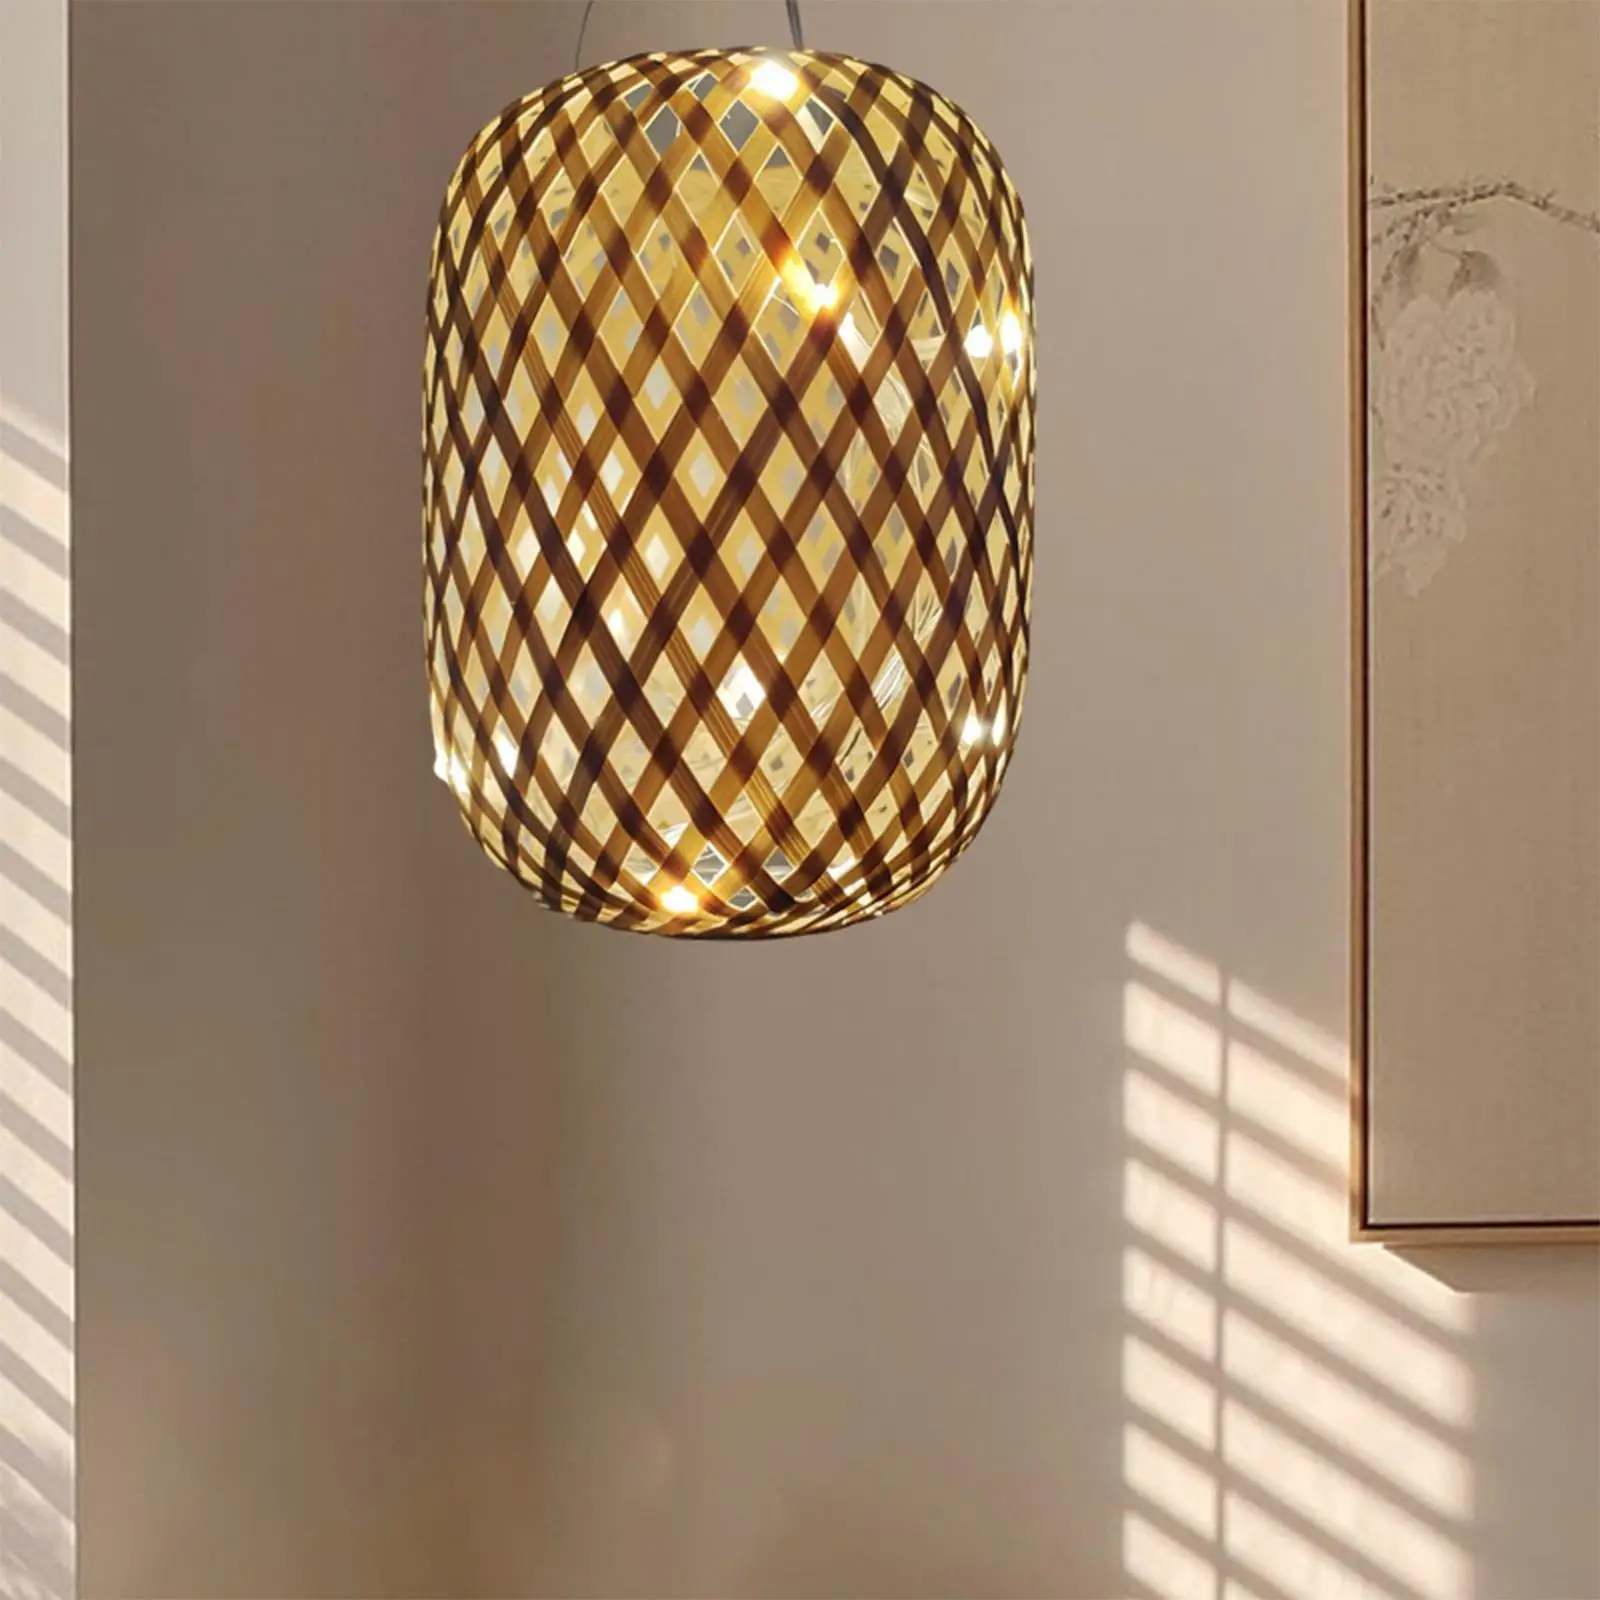 Handwoven Lampshade Ceiling Pendant Light Cover for Living Room Hotel Office